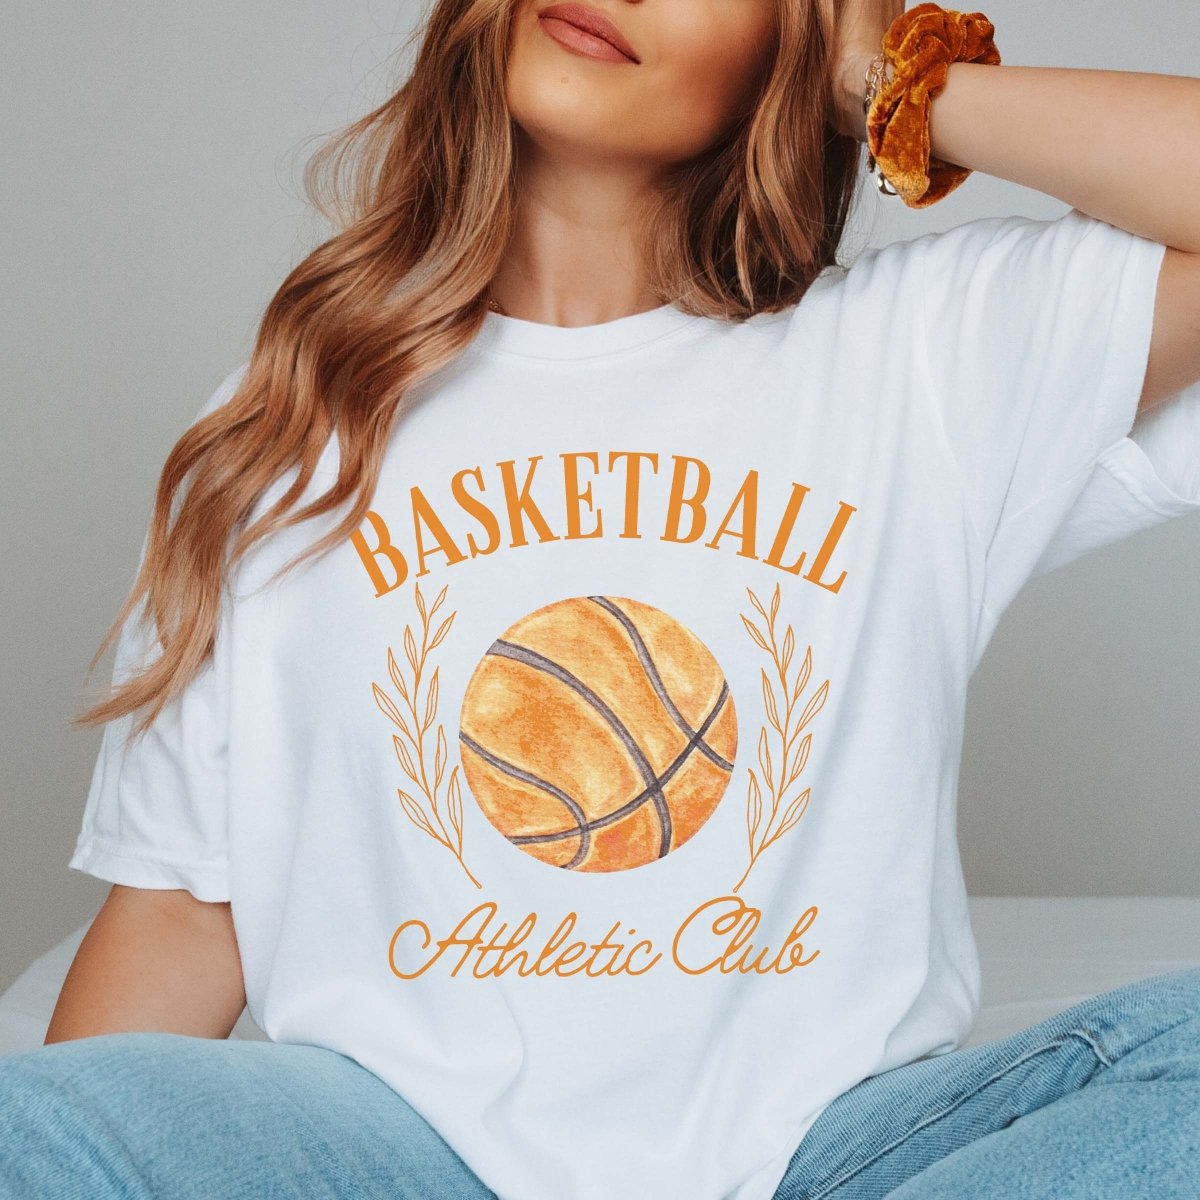 Basketball Athletic Club Comfort Color Tee - Limeberry Designs